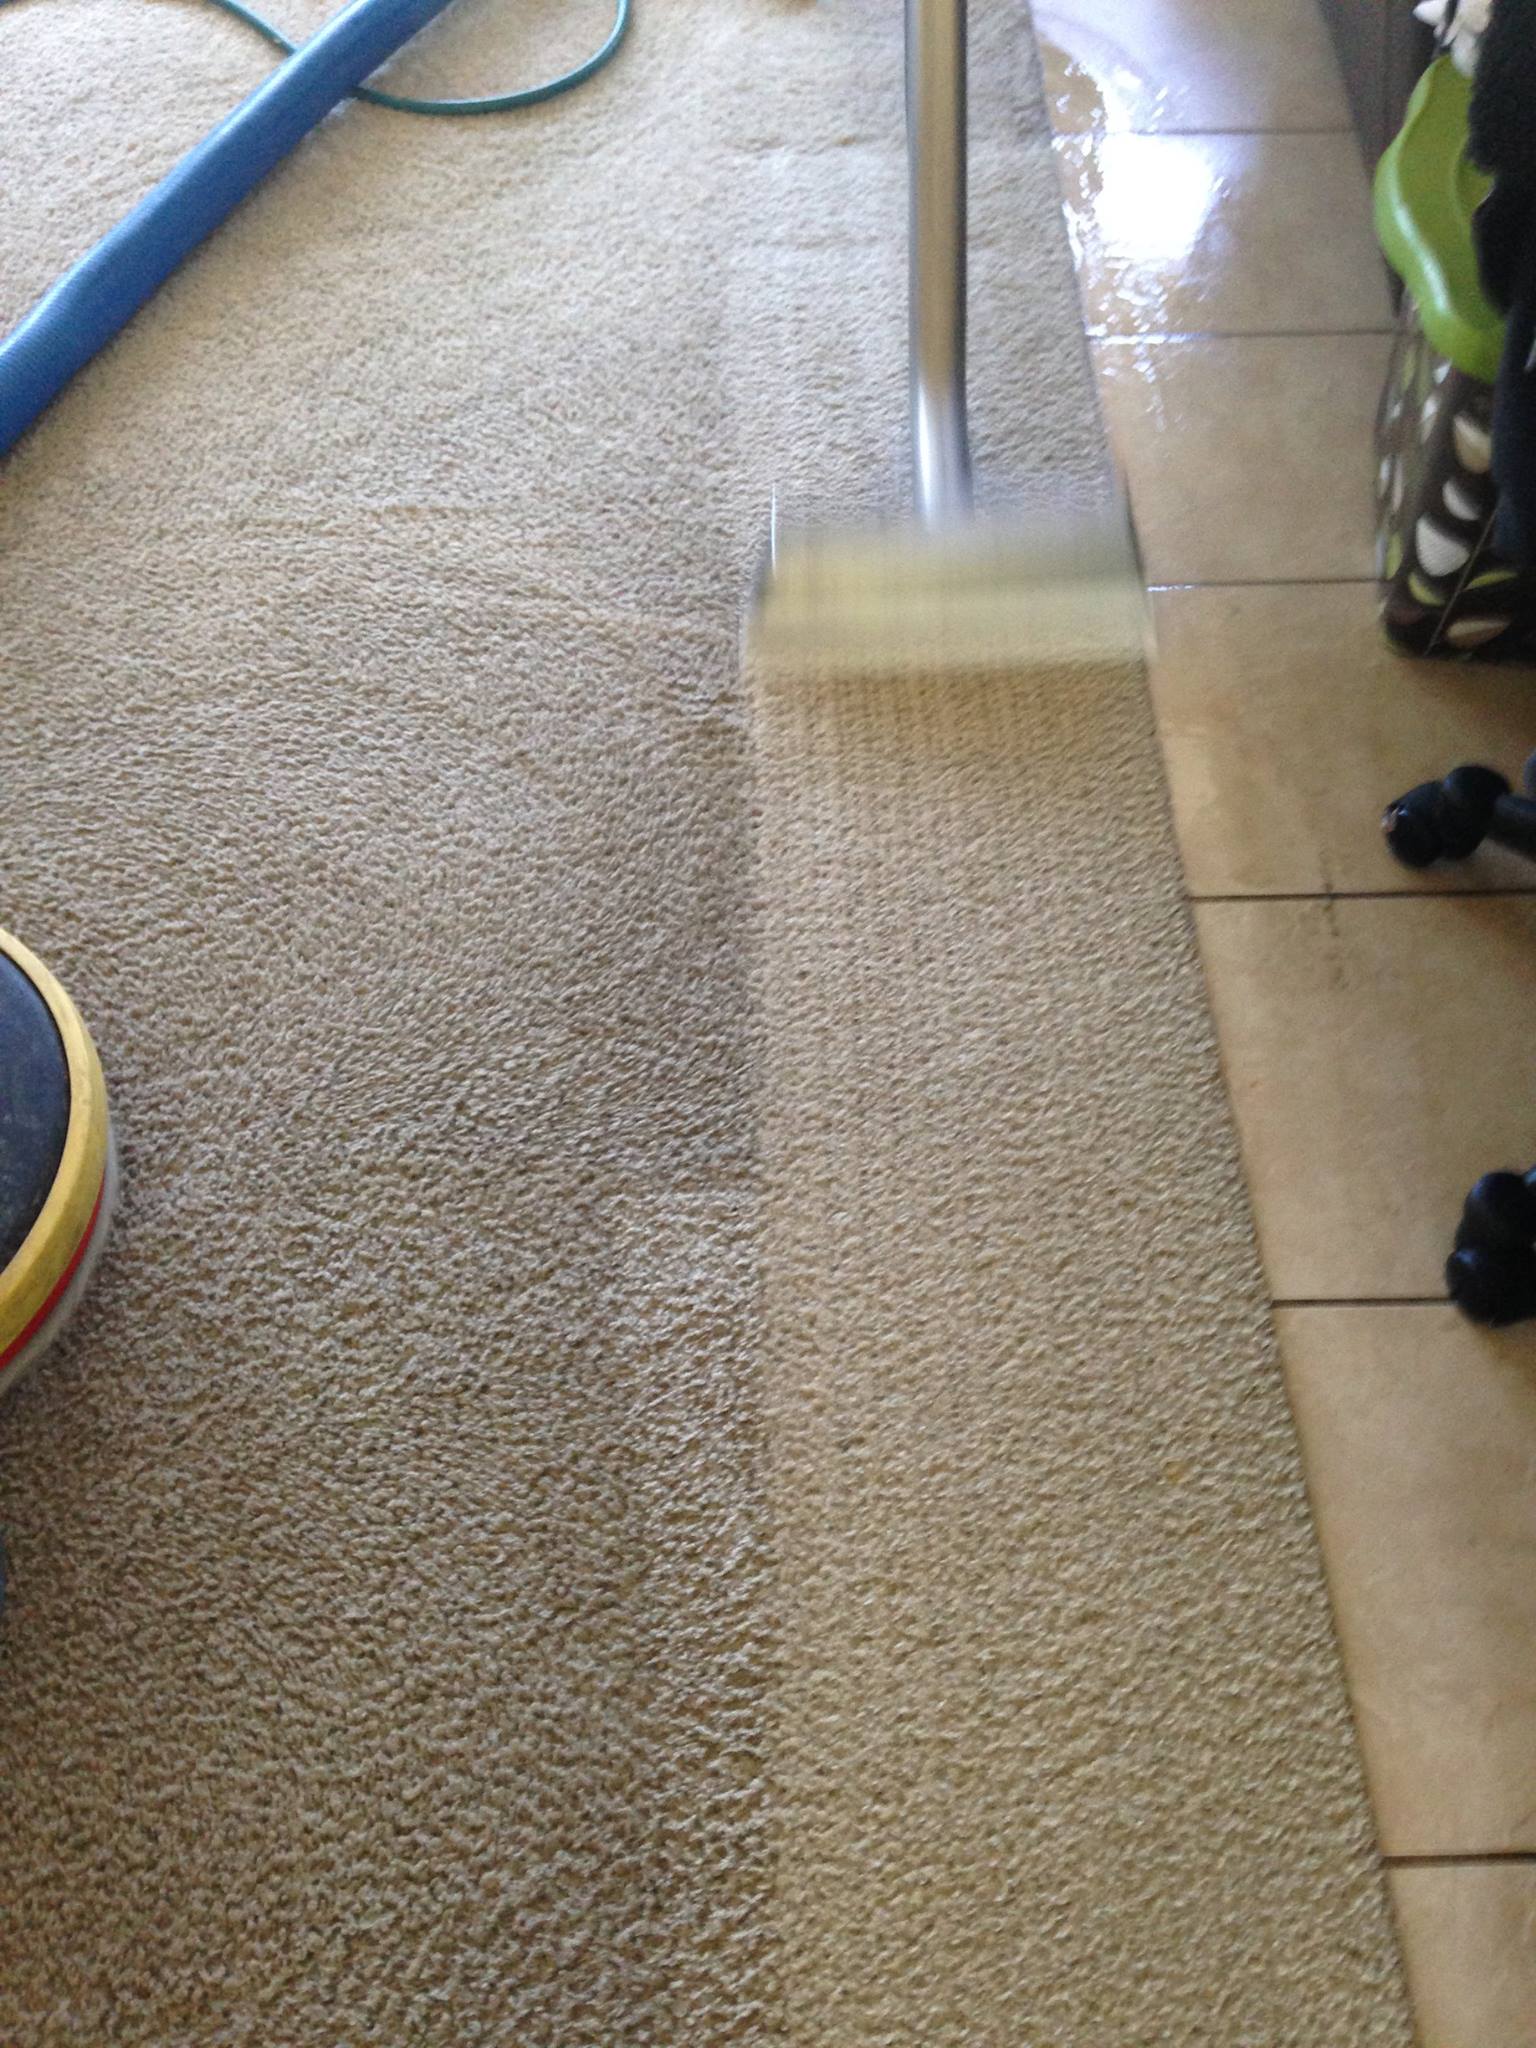 Professional Carpet Cleaning Services - Carpet cleaning Houston